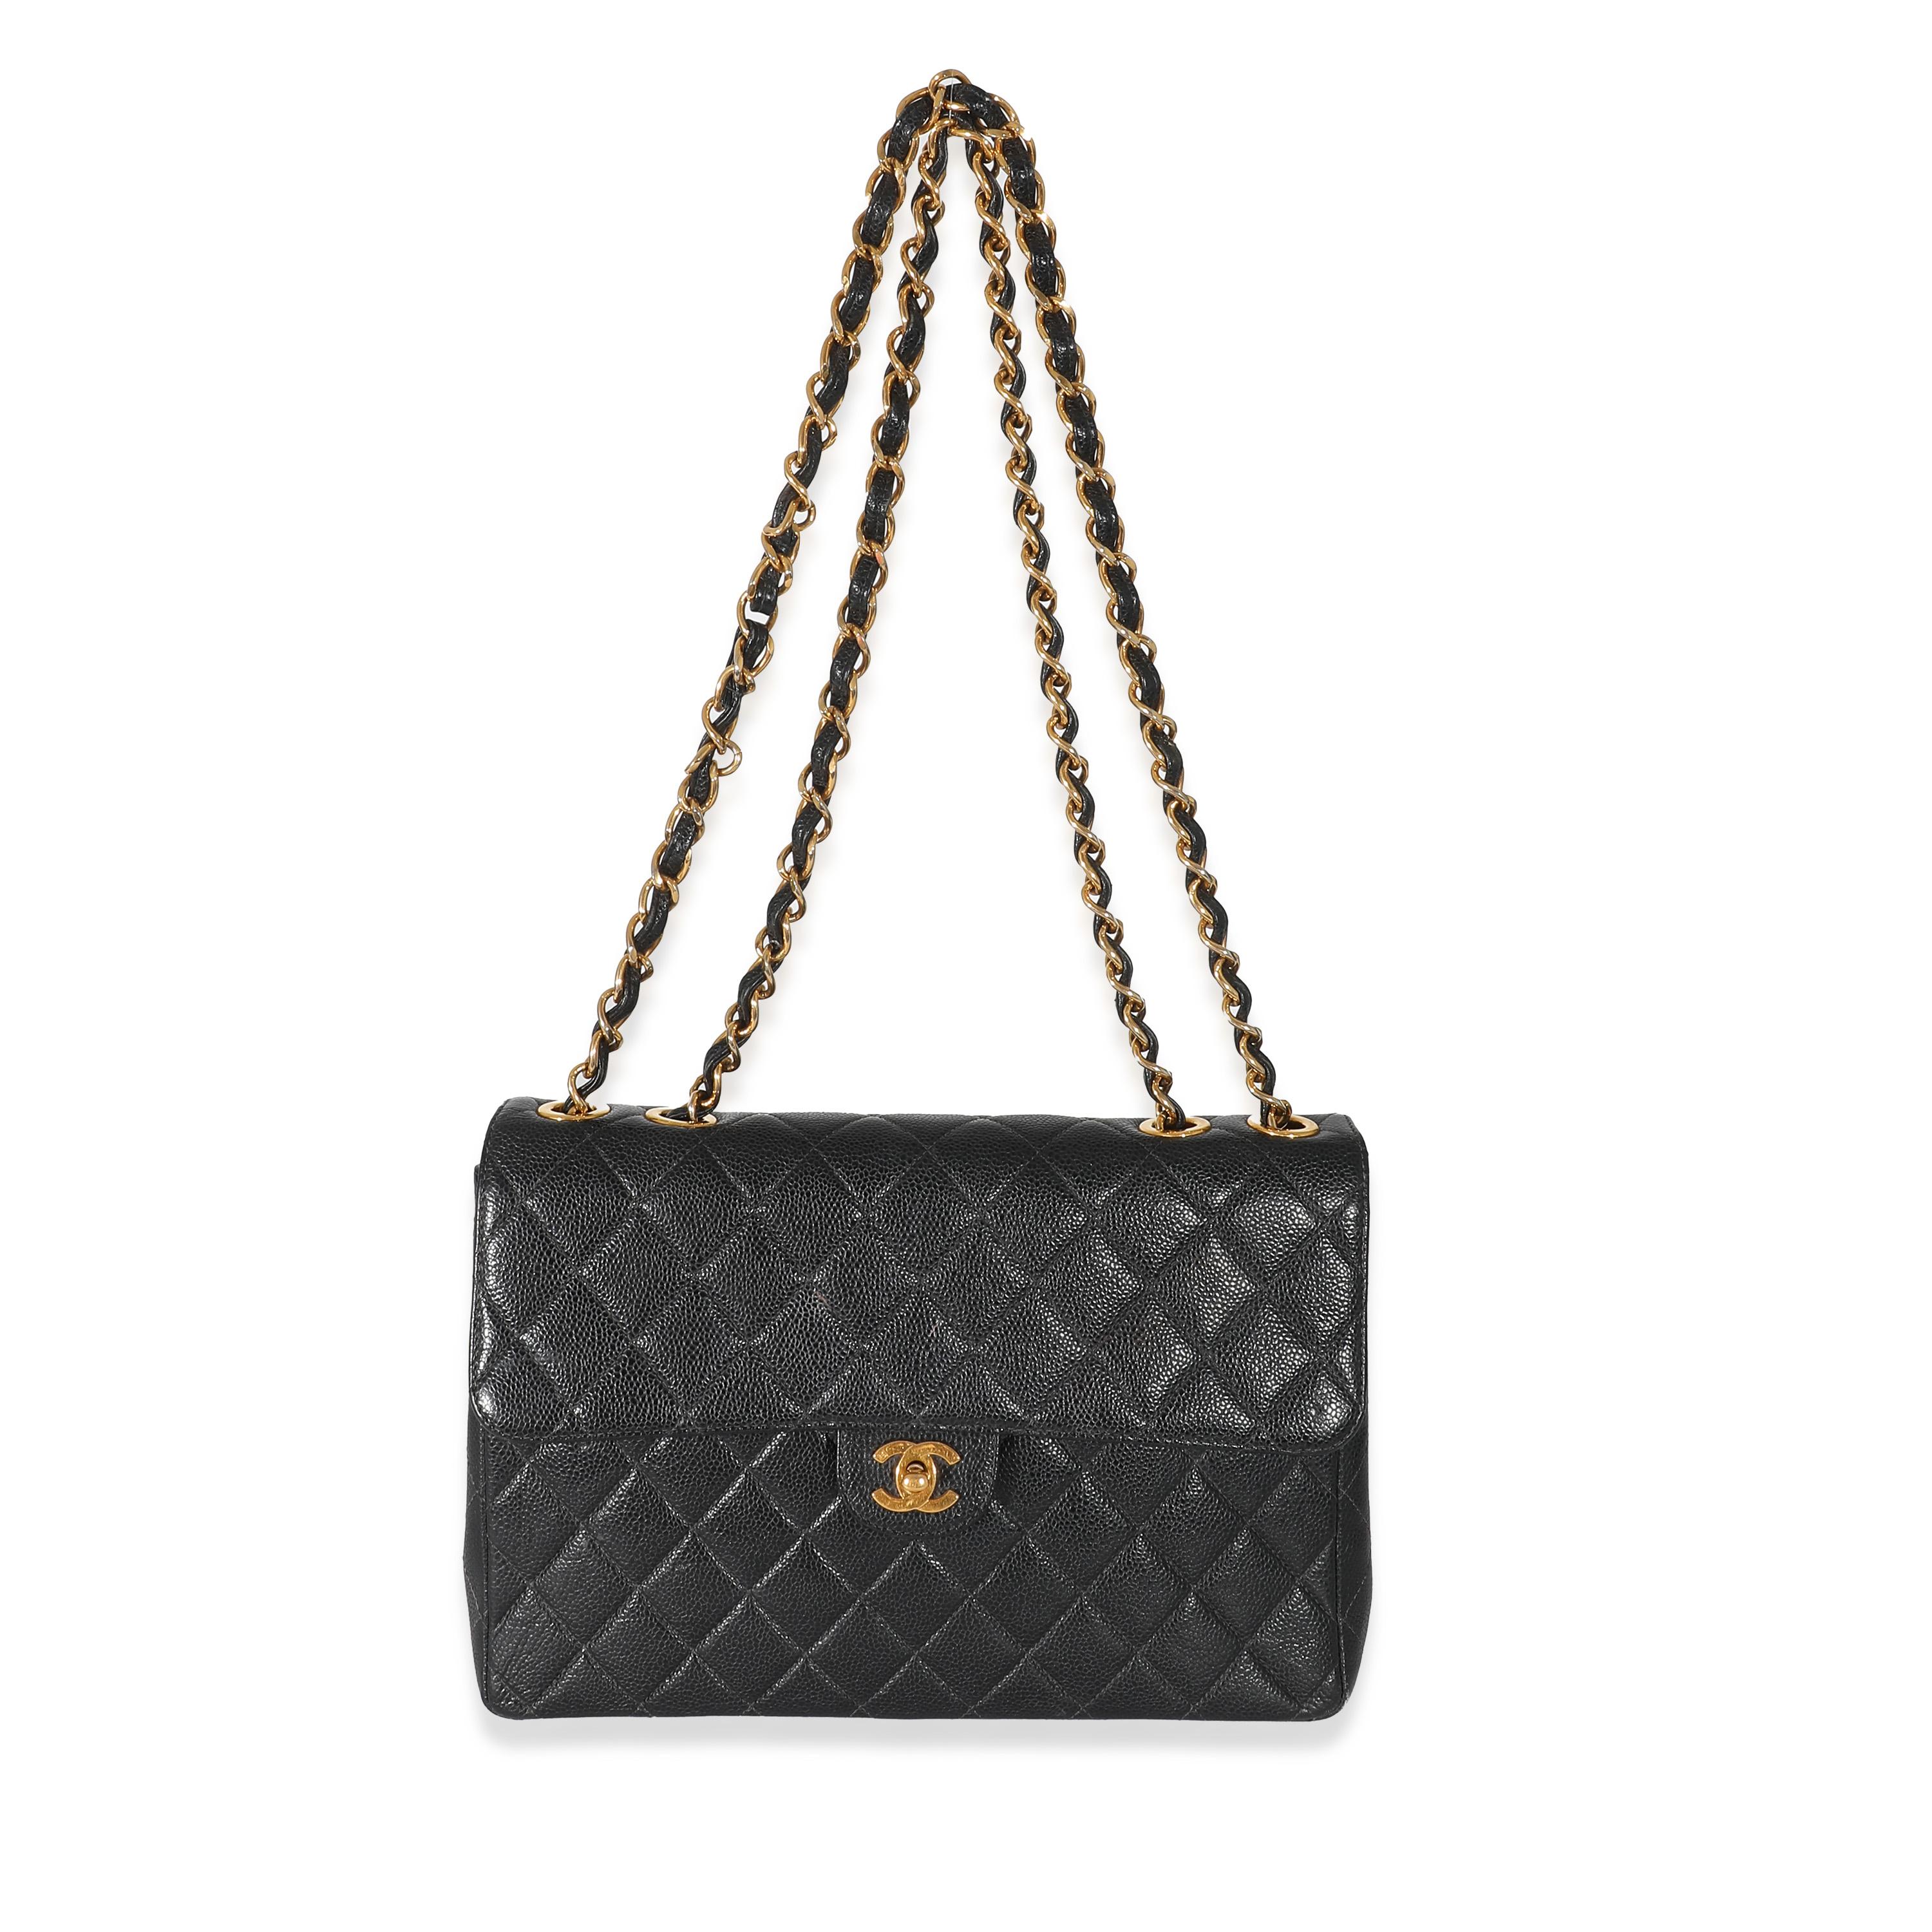 Listing Title: Chanel Vintage Black Quilted Caviar Jumbo Single Flap Bag
SKU: 134006
Condition: Pre-owned 
Handbag Condition: Good
Condition Comments: Item is in good condition with apparent signs of wear. Extensive scuffing, marks, and